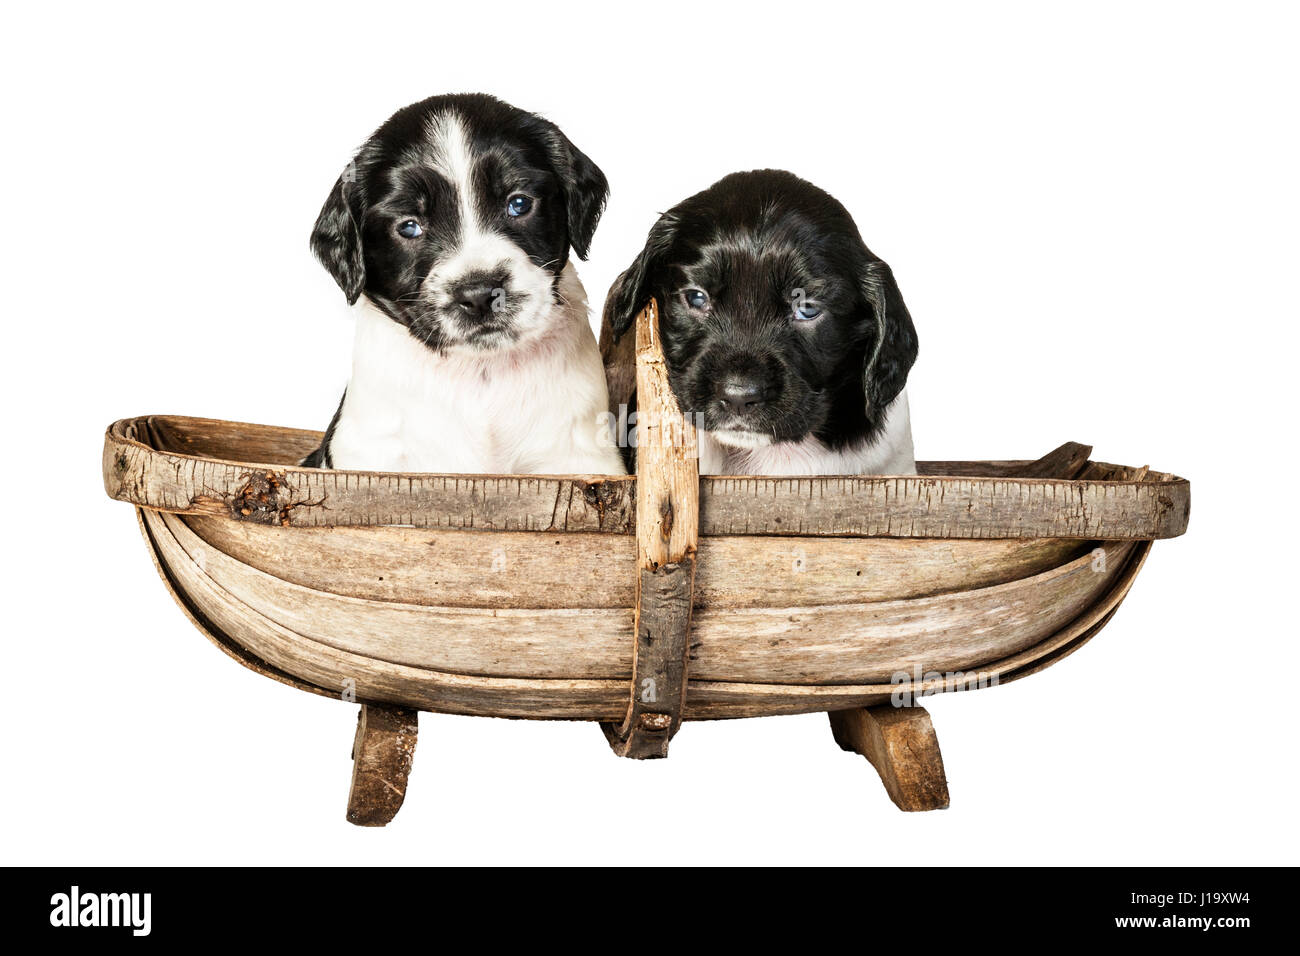 Two 4 week old black and white English Springer Spaniel puppys in a trug Stock Photo